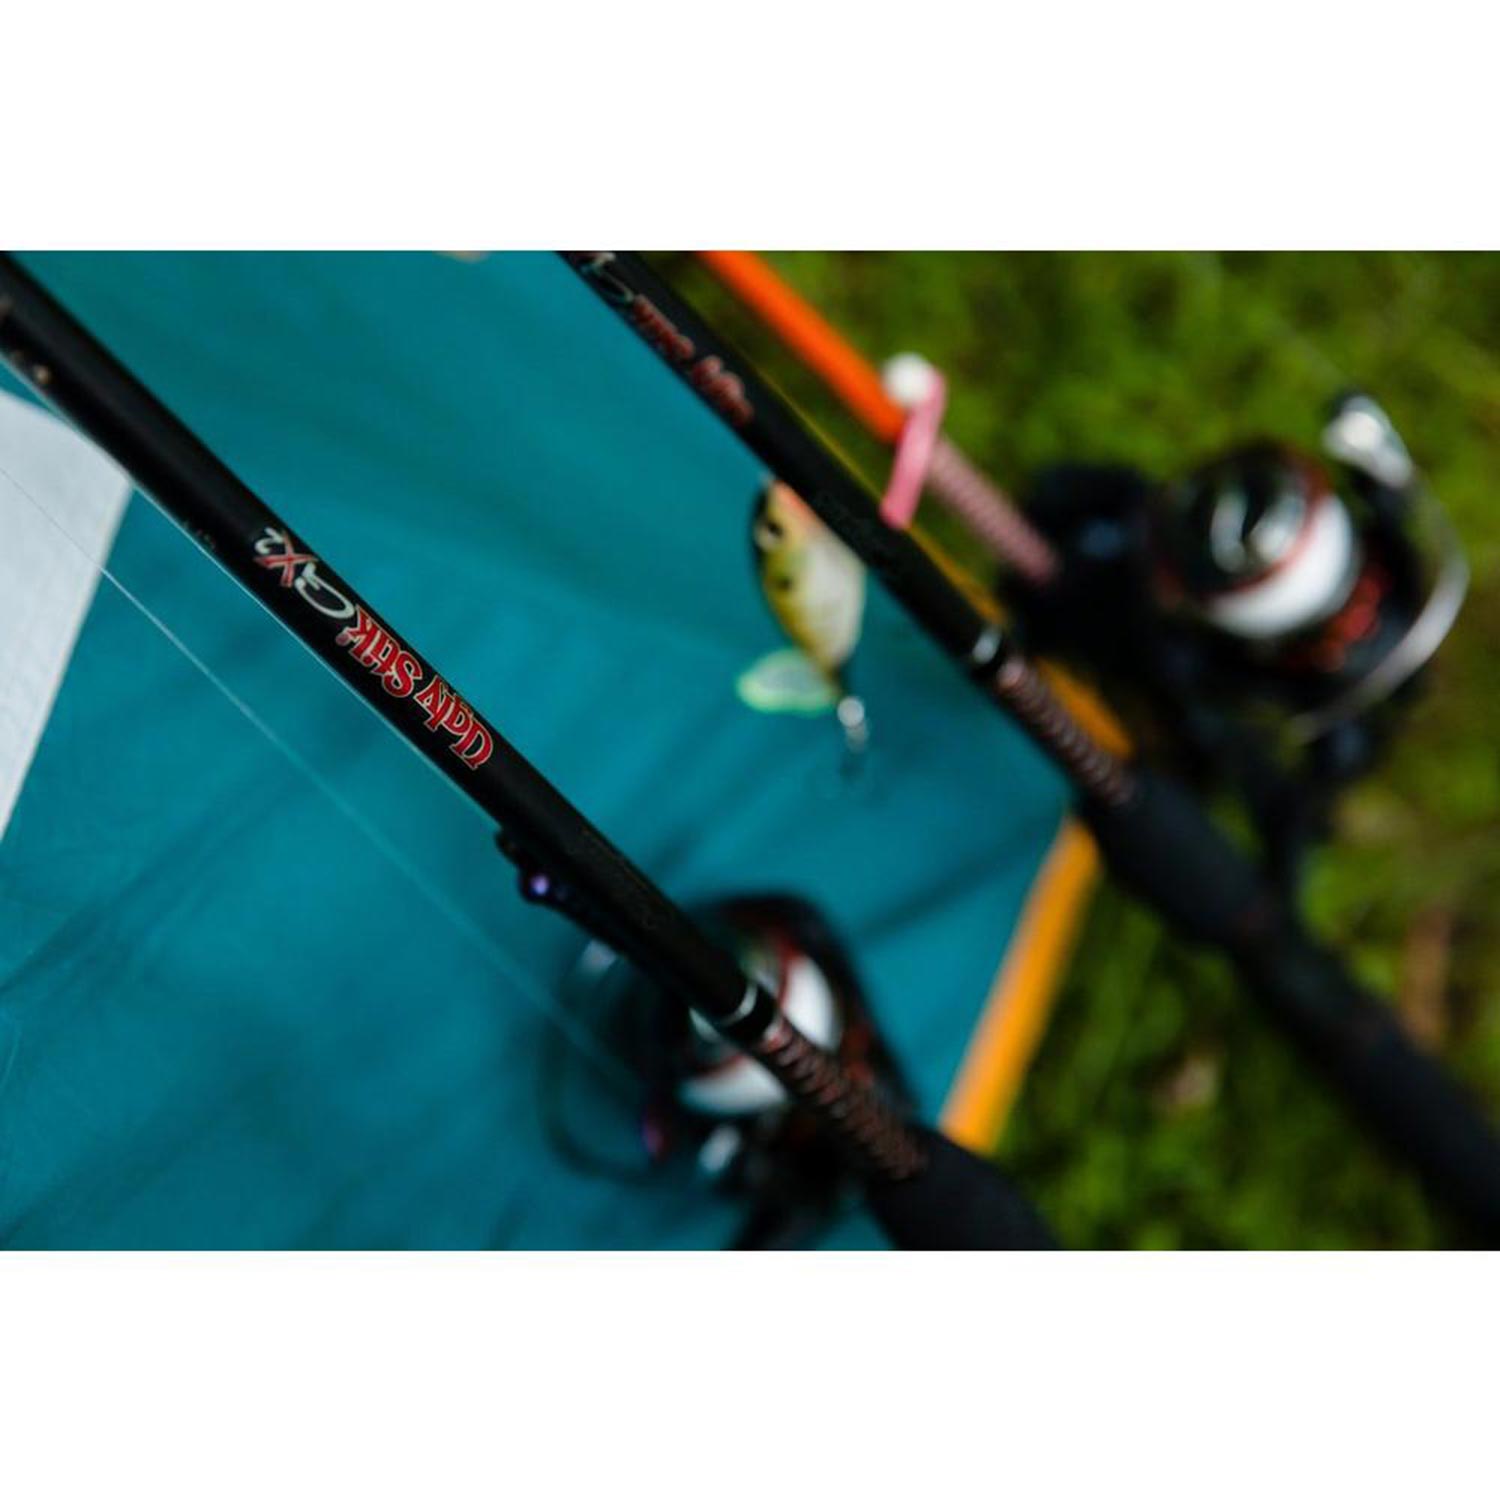 Shakespeare Ugly Stik GX2 7'9 12-20lb - Angling Centre West Bay